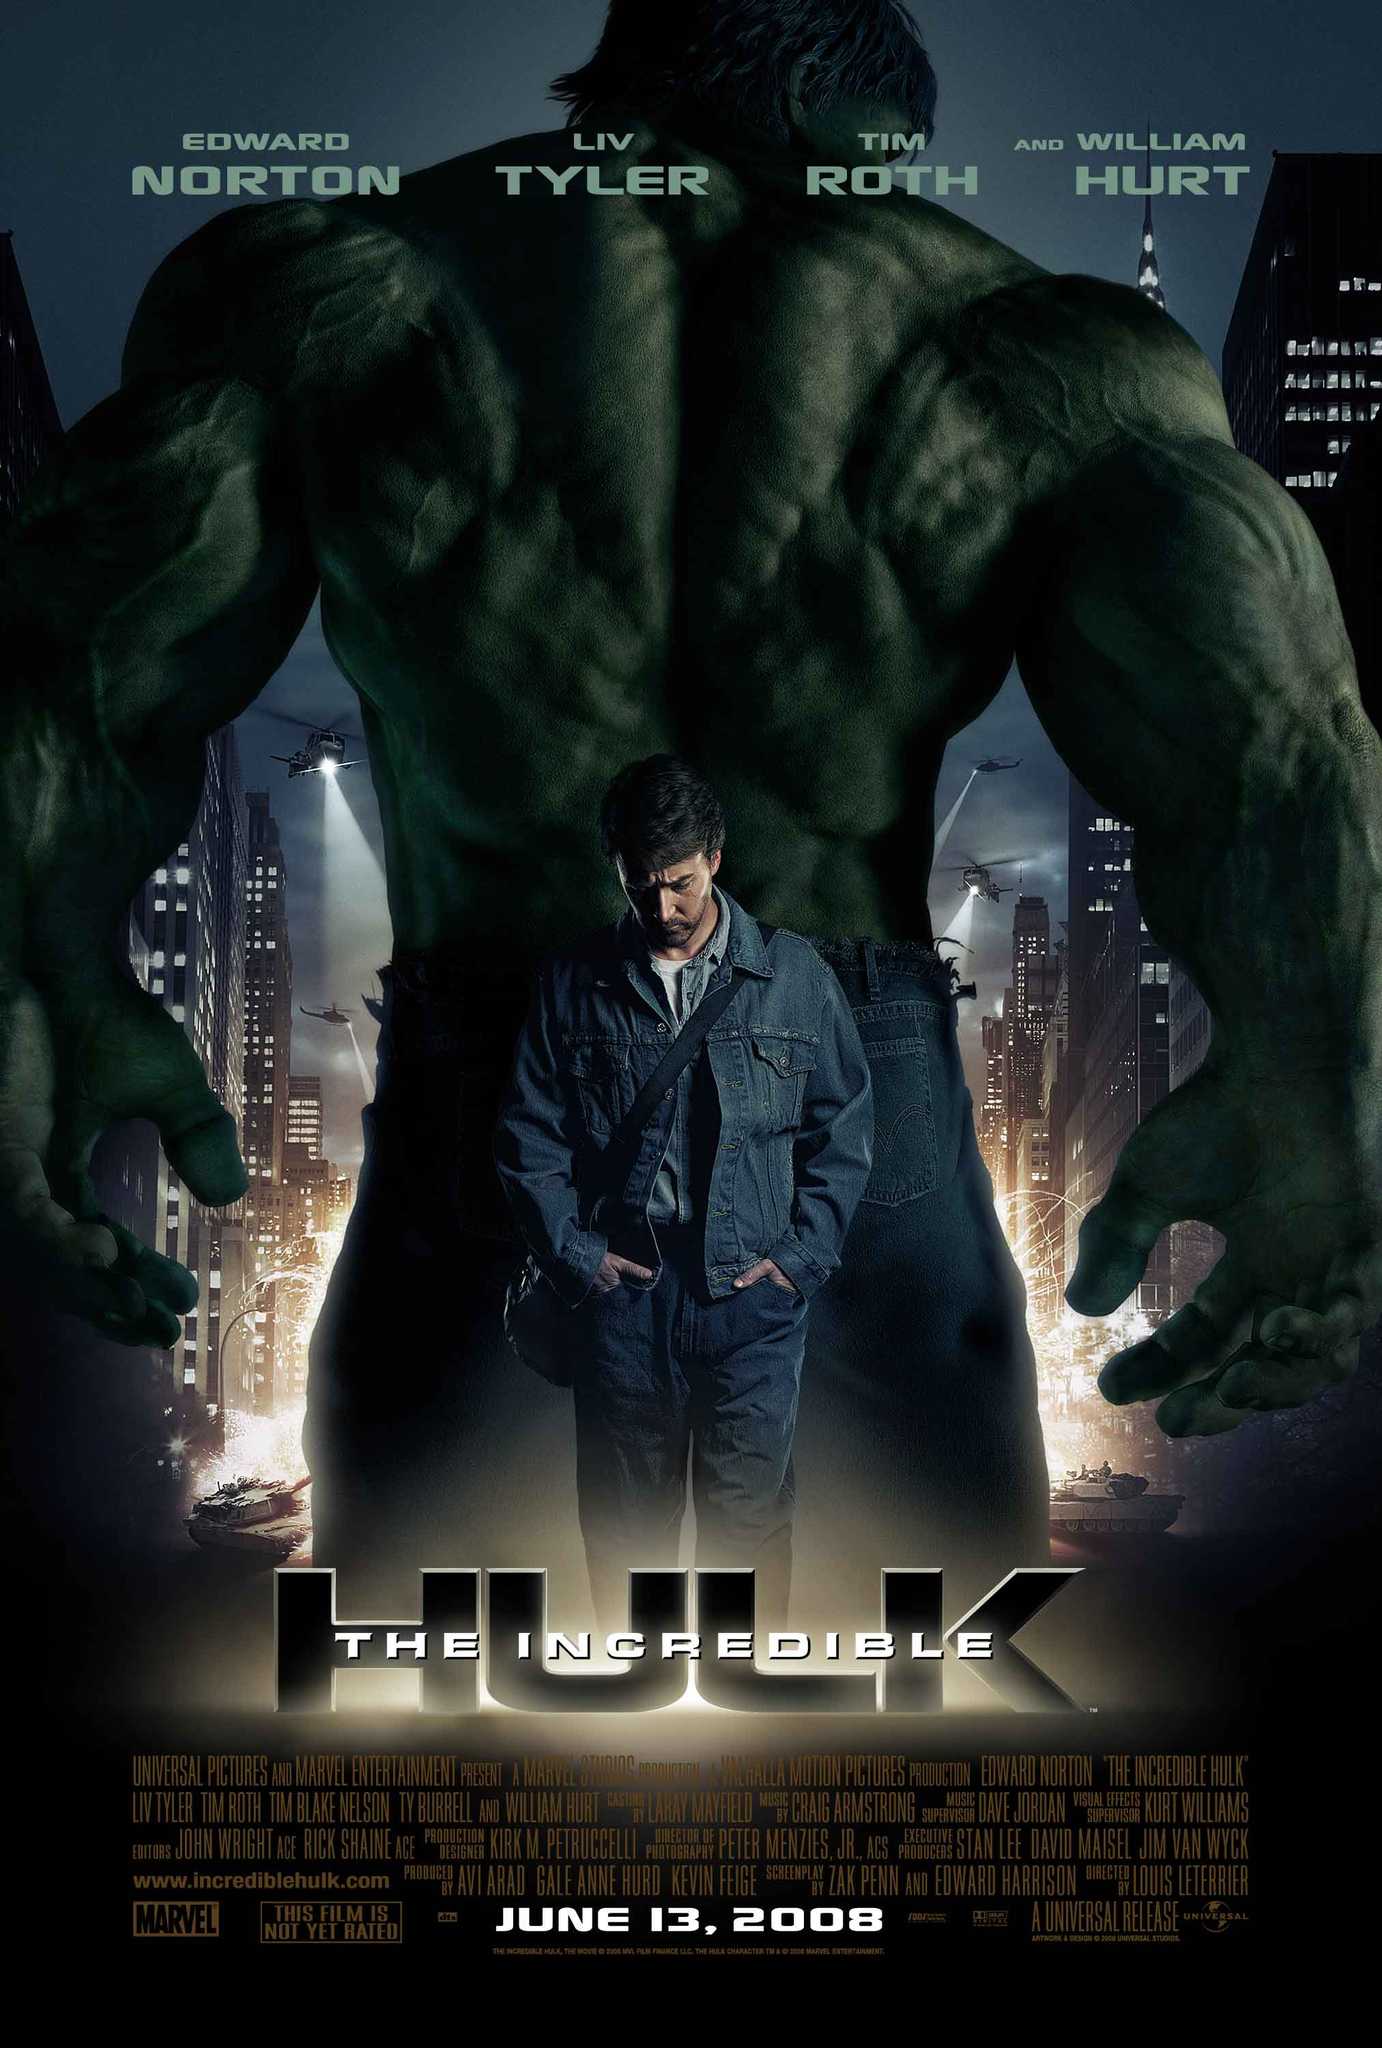 FULL MOVIE: The Incredible Hulk (2008) [Action]